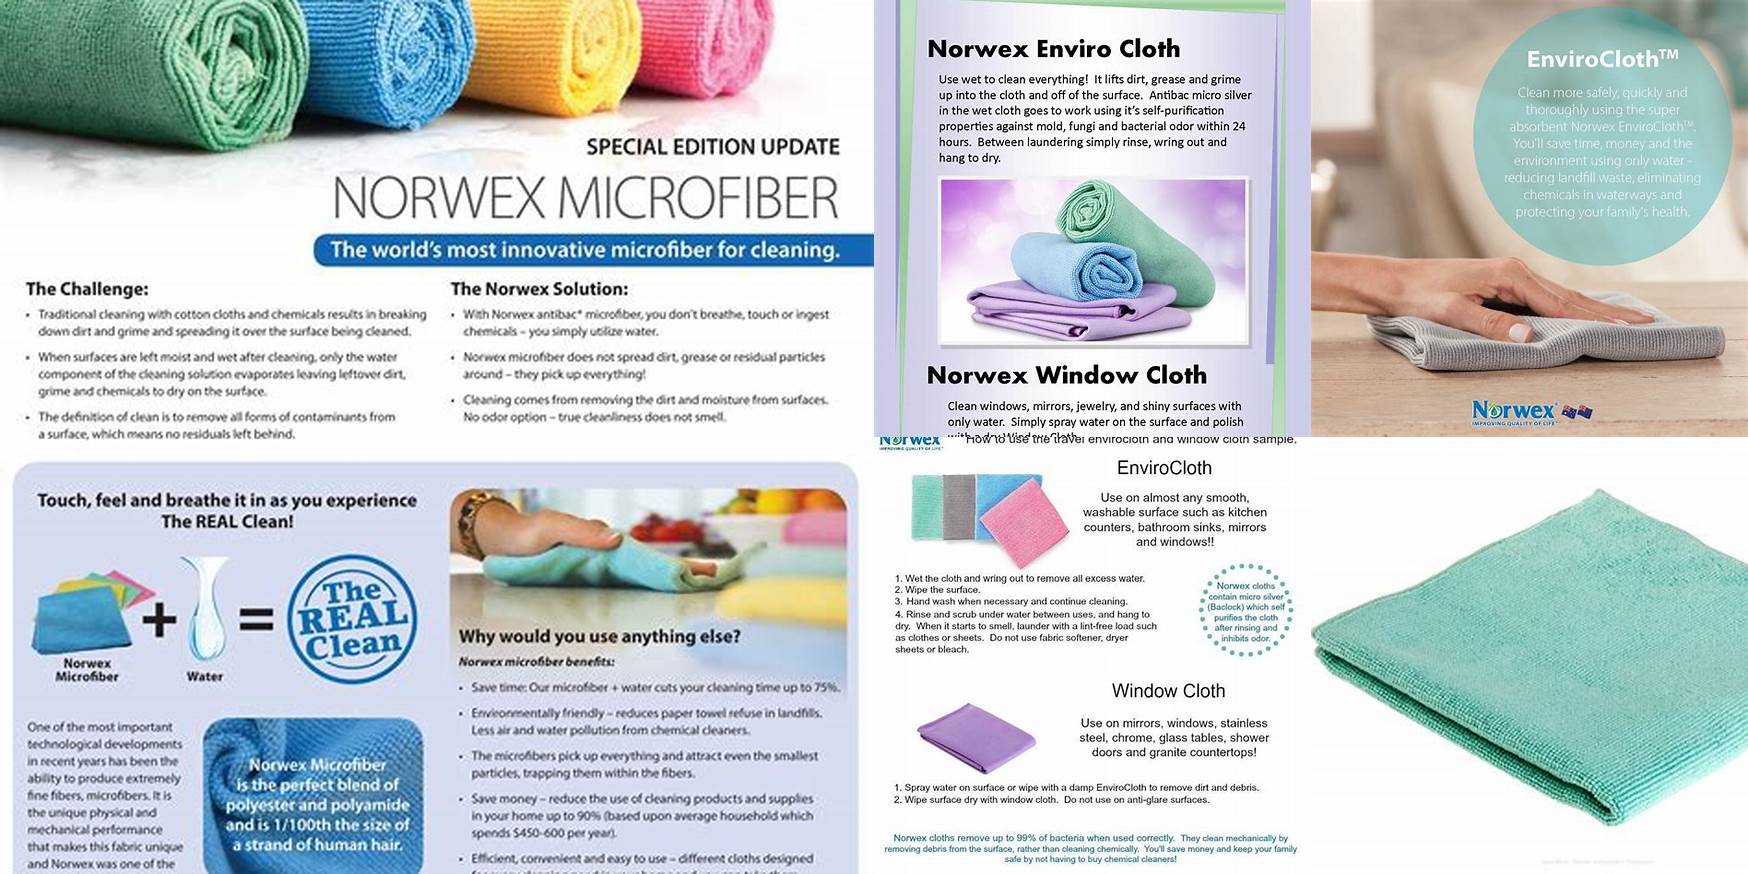 What Is The Norwex Enviro Cloth Used For